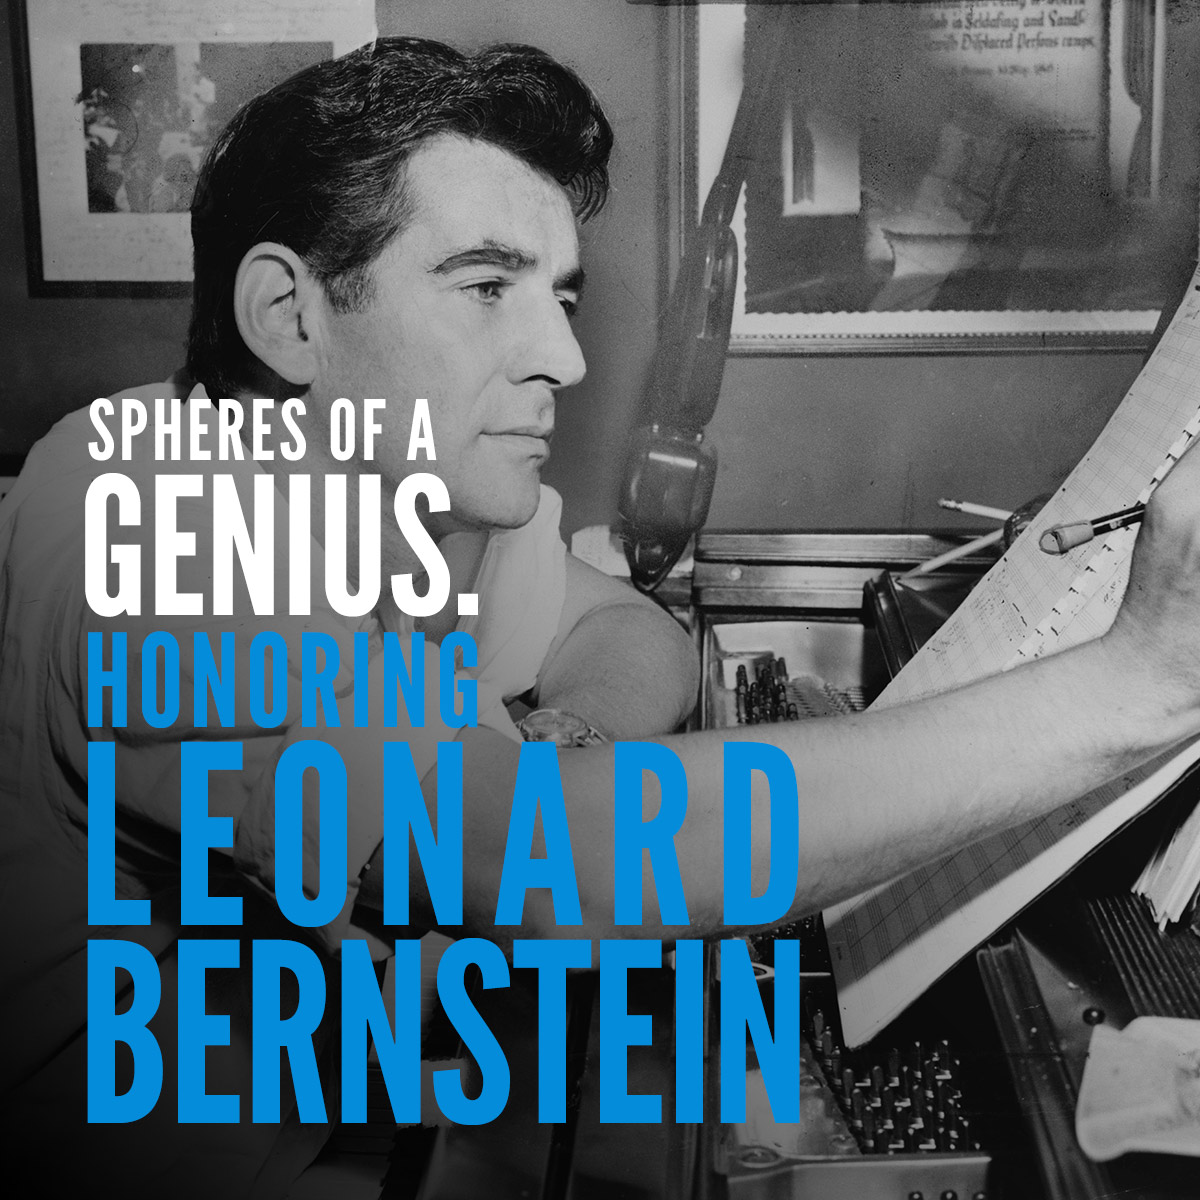 A Tribute to Leonard Bernstein's Compositions